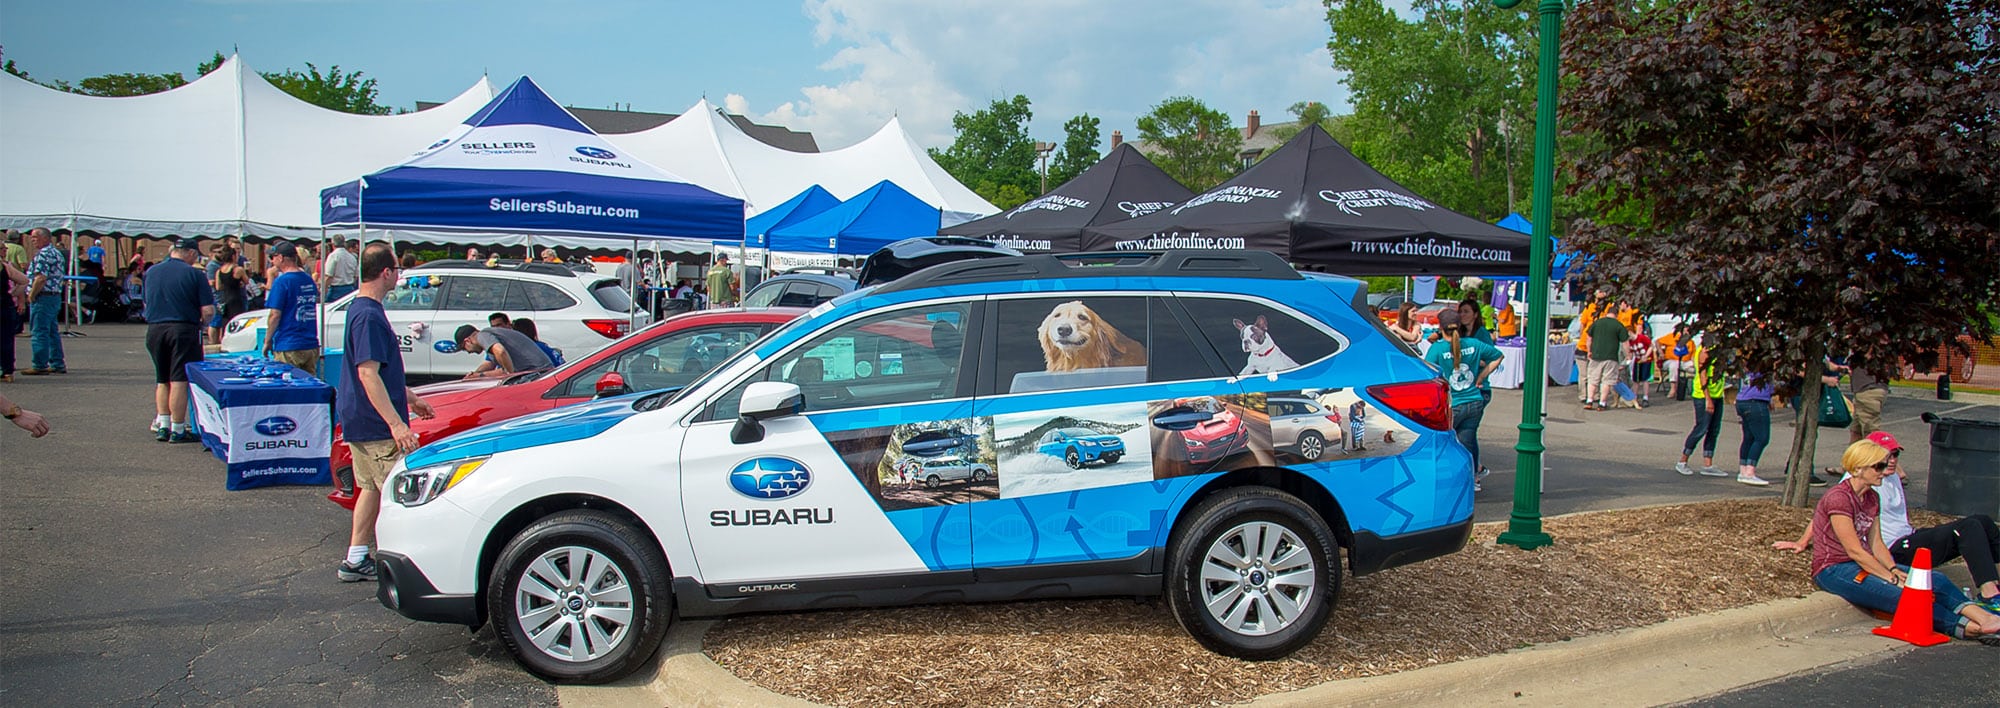 A Subaru Outback with photos of dogs and vehicles is on display at an event